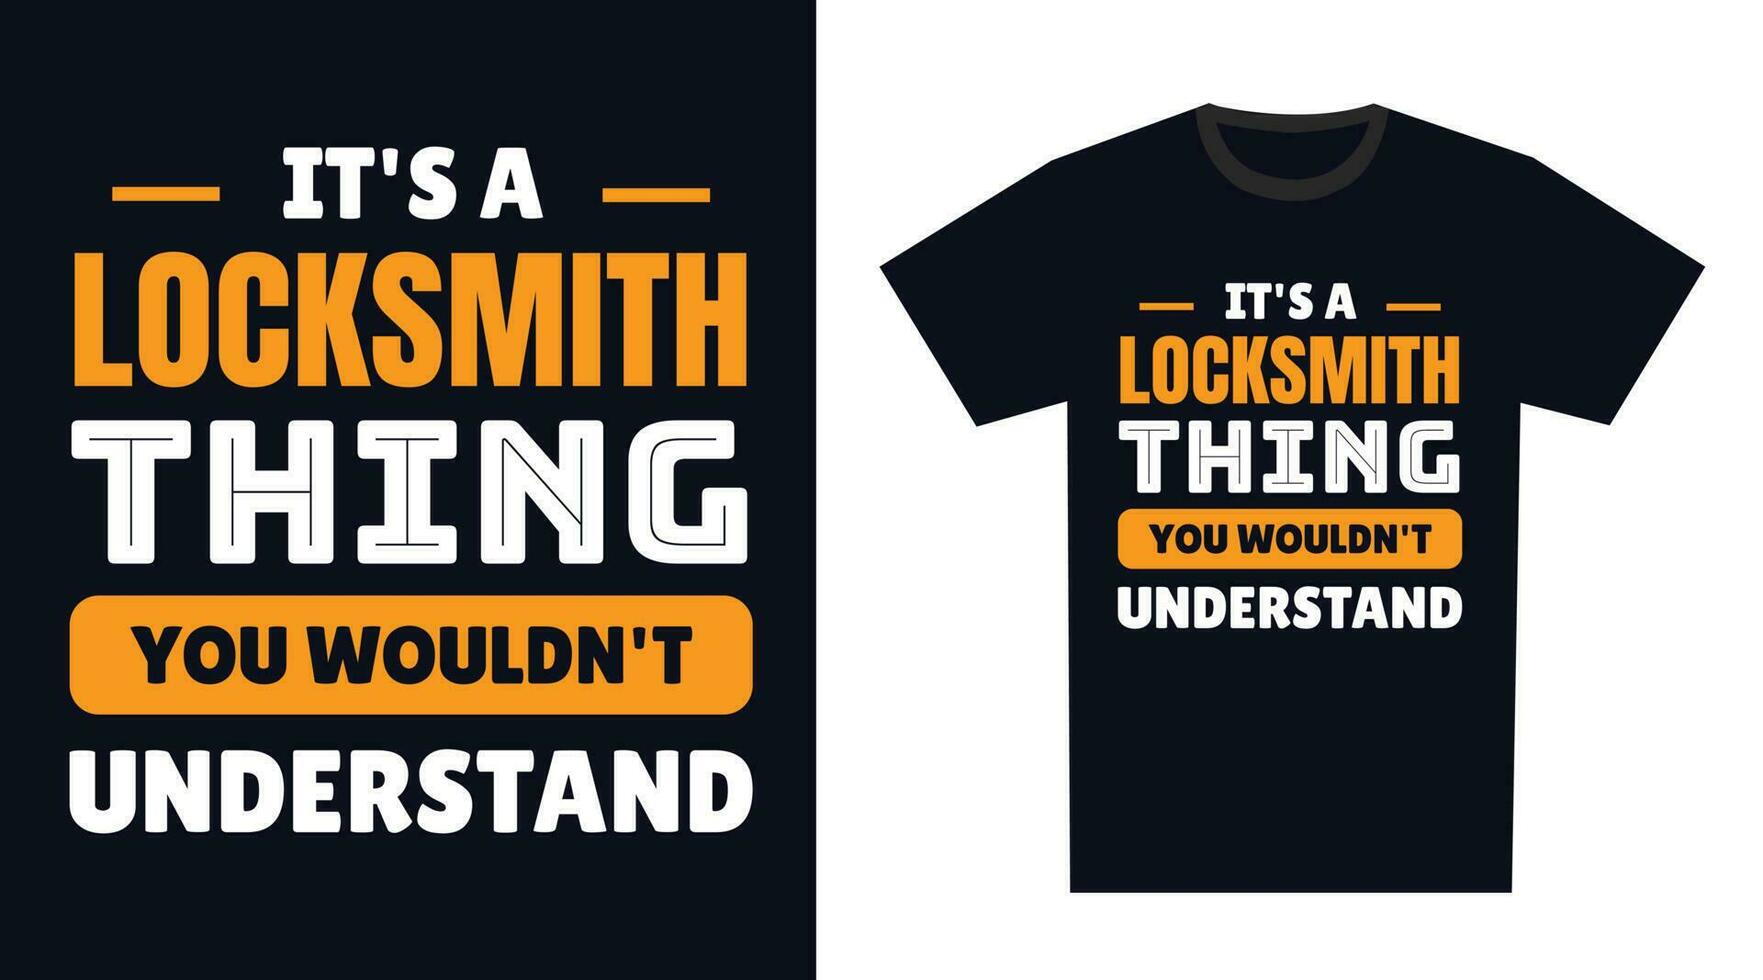 Locksmith T Shirt Design. It's a Locksmith Thing, You Wouldn't Understand vector